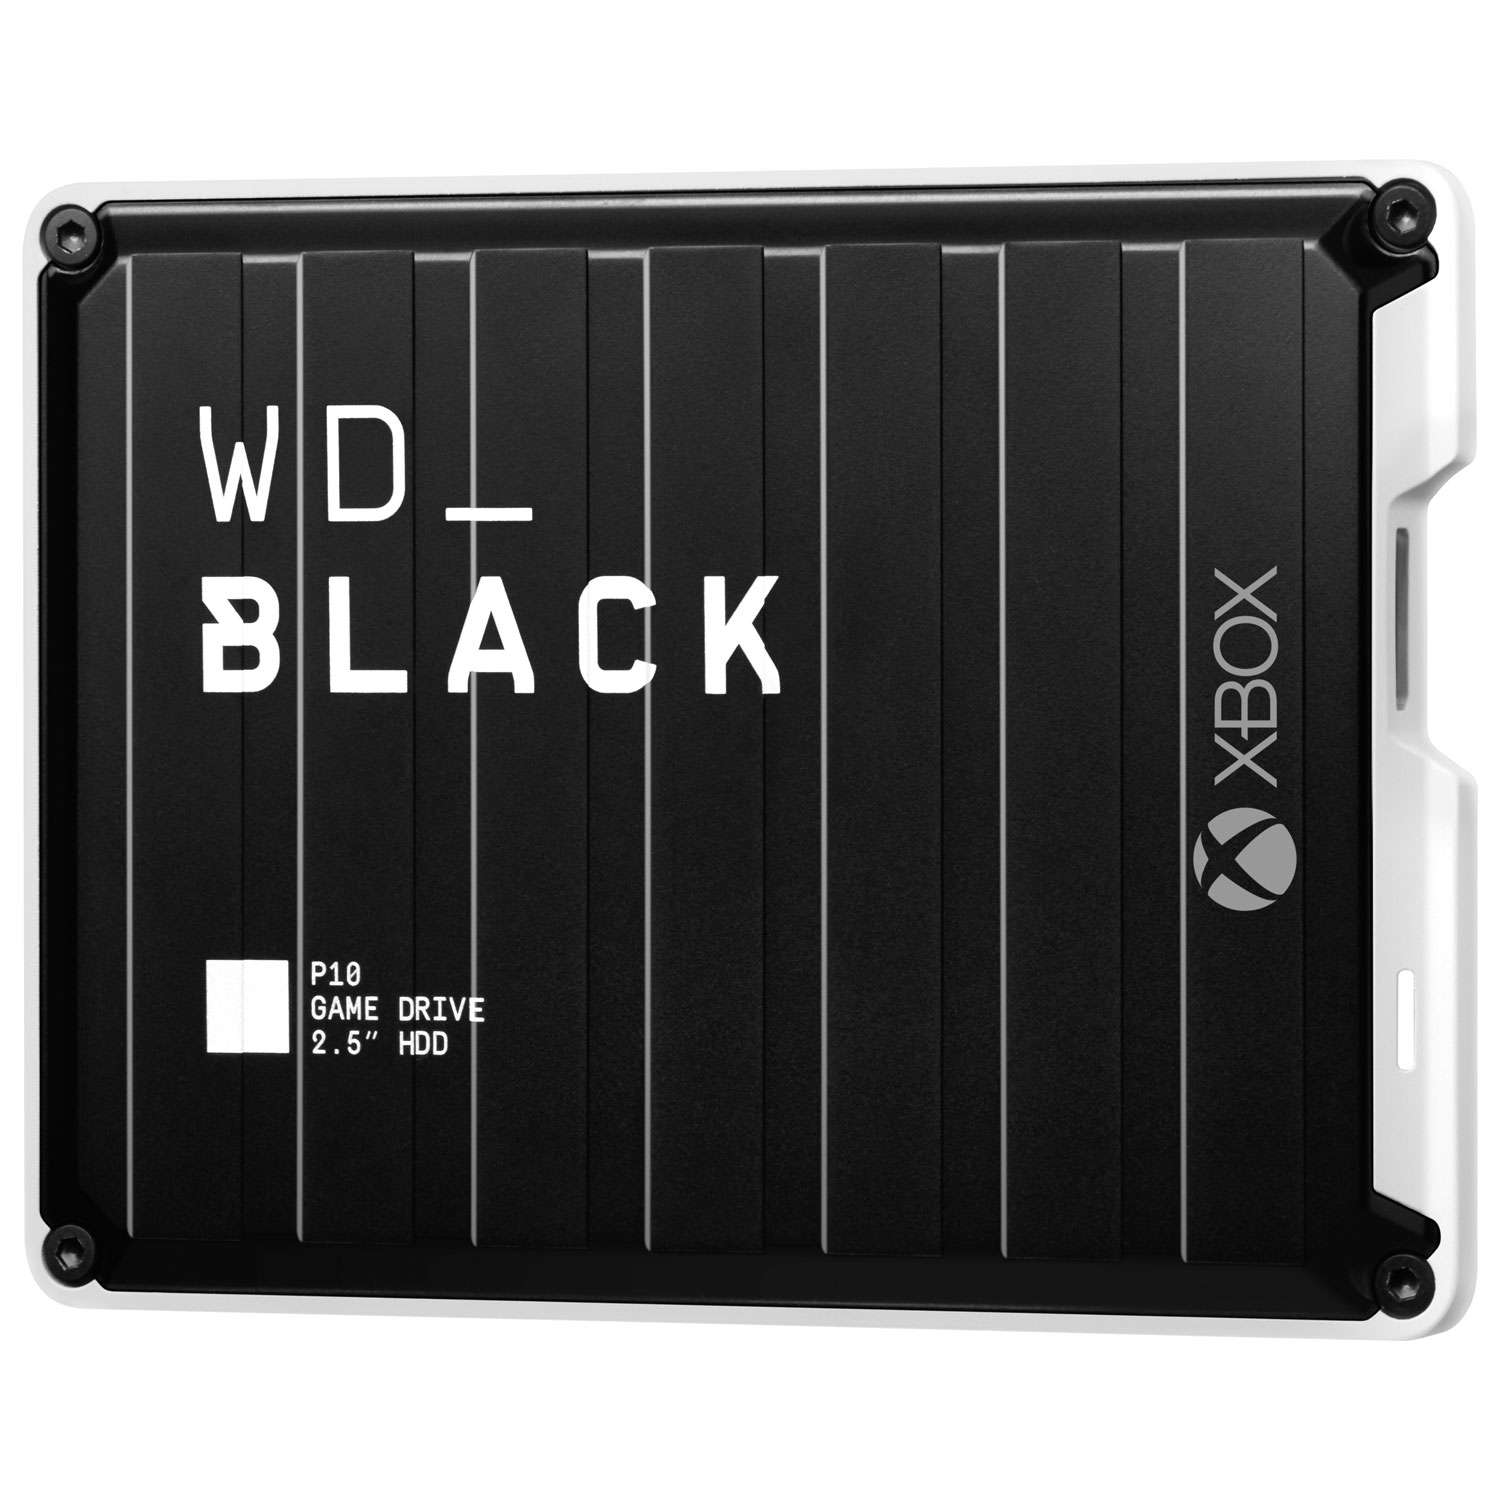 WD_BLACK P10 2TB External Game Drive for Xbox Series X|S / Xbox One